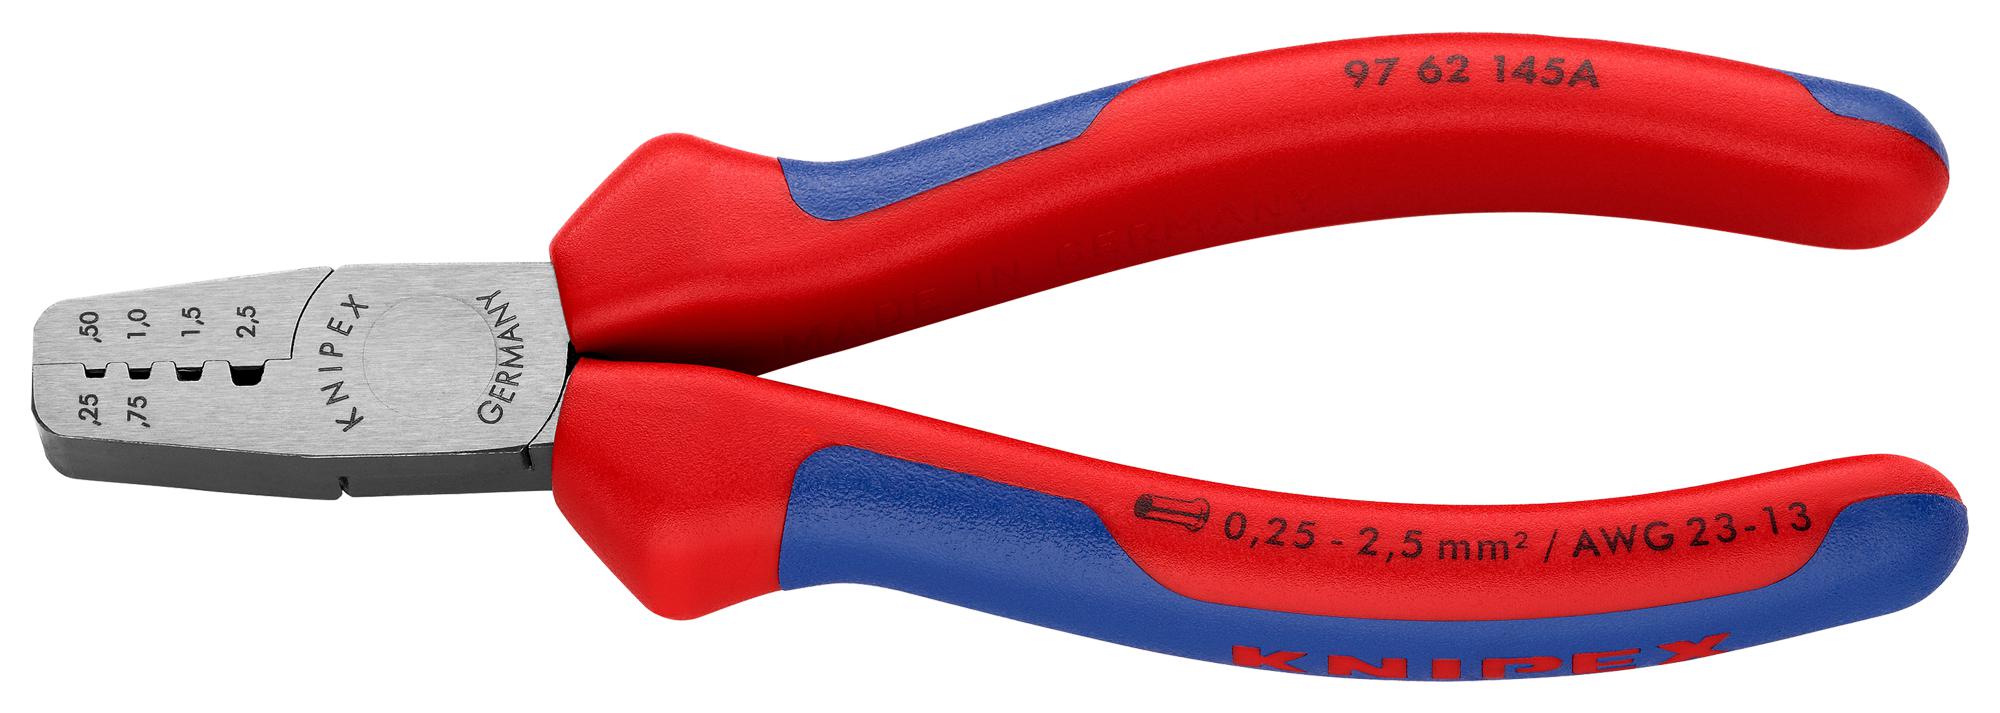 97 62 145 A CRIMP PLIER, FOR CABLE LINKS KNIPEX